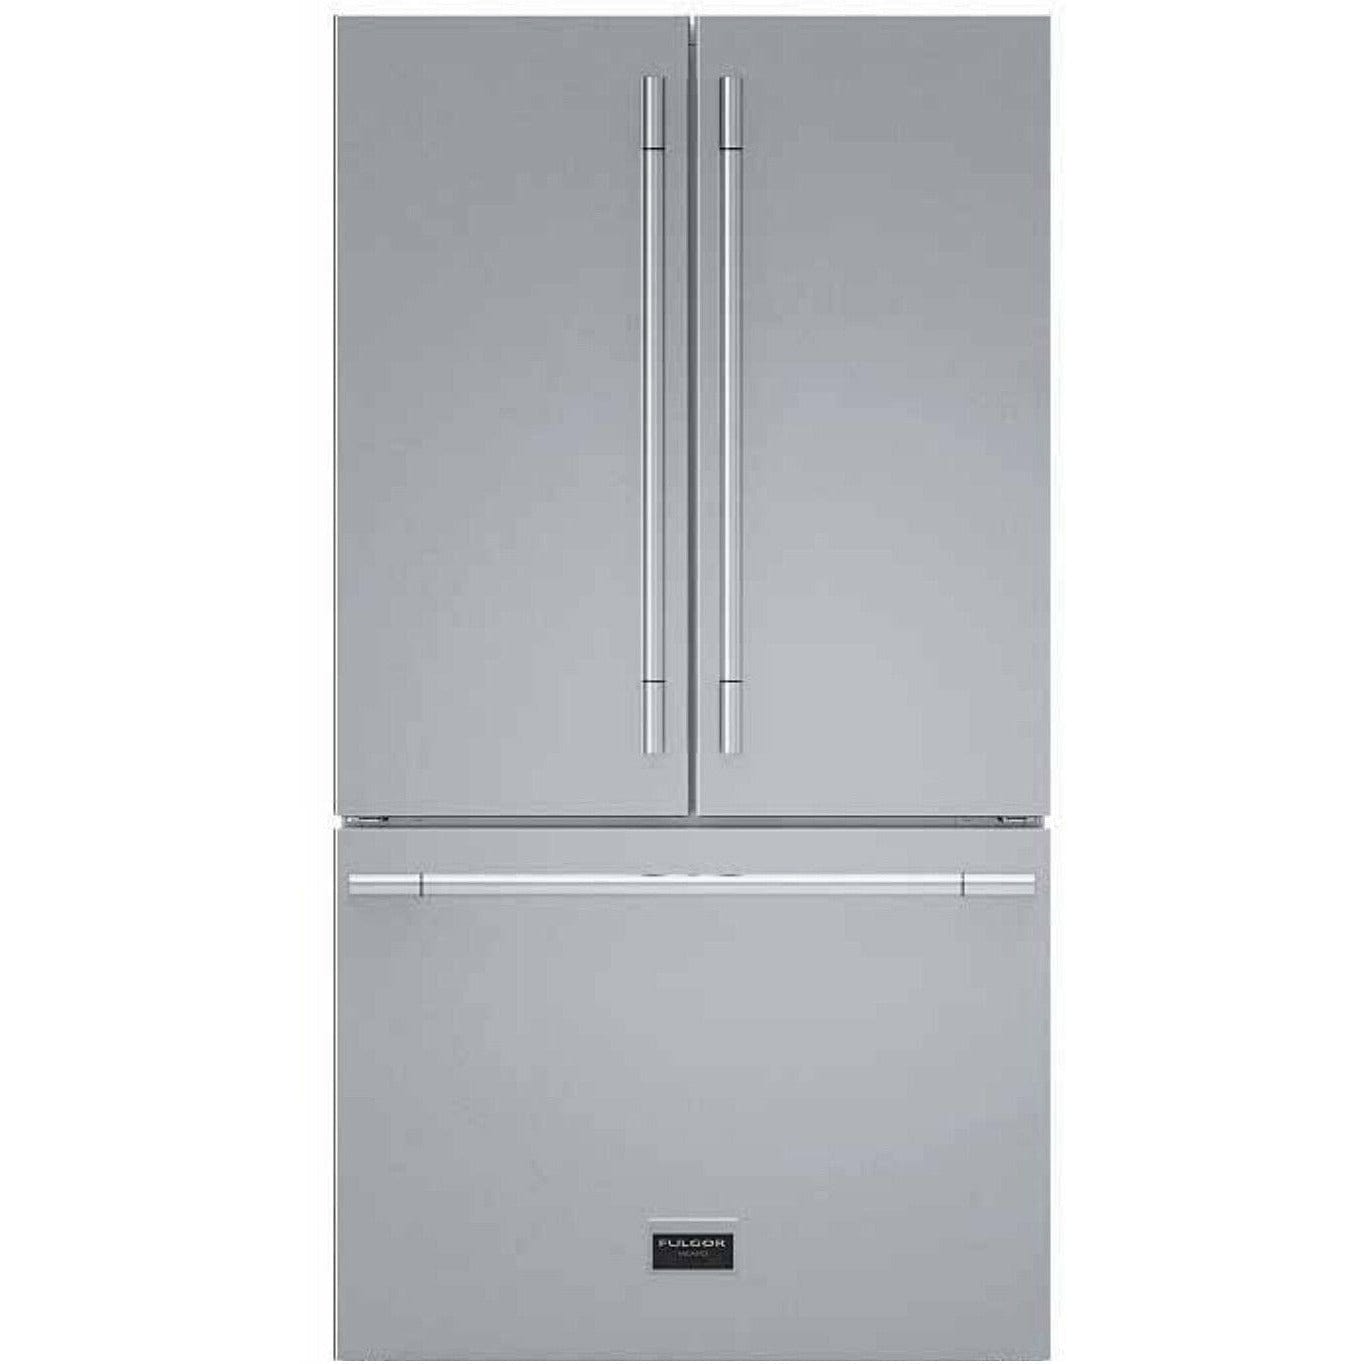 Fulgor Milano Package - 36" Gas Range, 36" French Door Refrigerator, 24" Built-In Dishwasher and 36" Wall Mount Hood Ranges F6PGR366S2F6FBM36S2 Luxury Appliances Direct